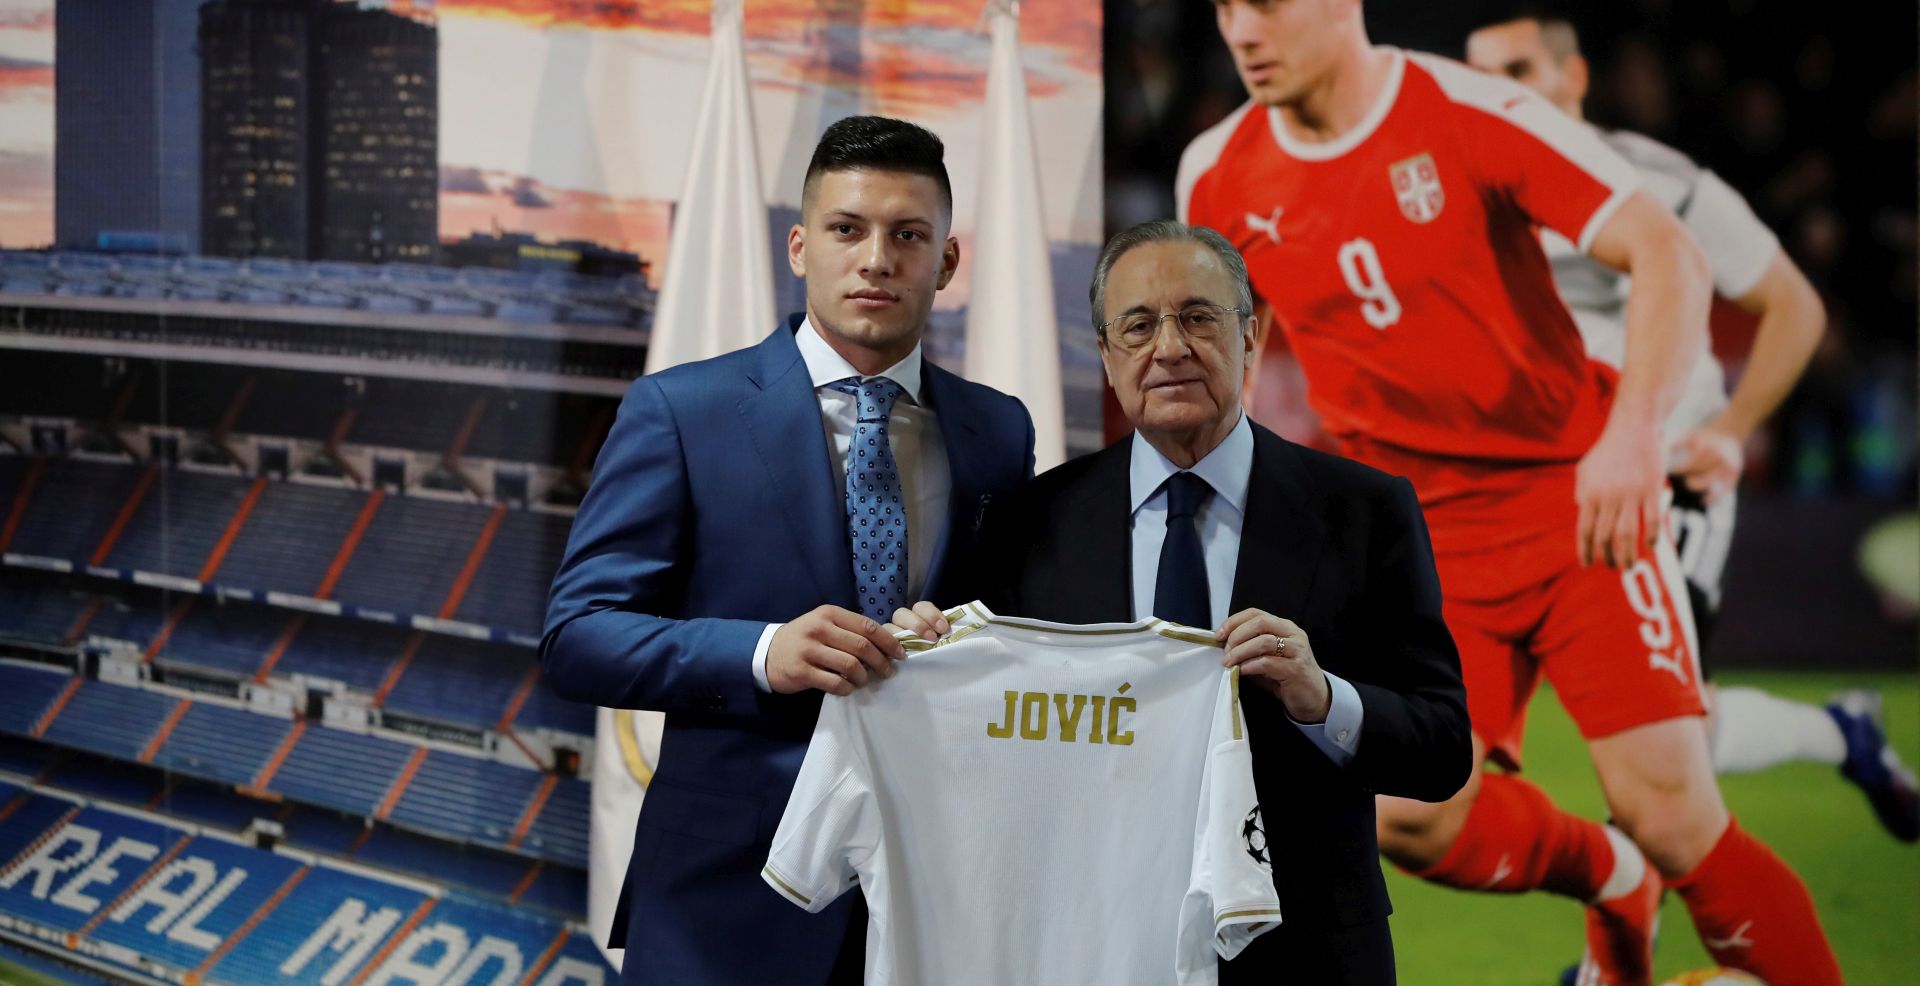 epa07643396 Real Madrid's new soccer player Luka Jovic (L) poses with Real Madrid's President, Florentino Perez, during his presentation at Santiago Bernabeu stadium in Madrid, Spain, 12 June 2019. Jovic has signed a five-seasons-contract with Real Madrid after Spanish LaLiga's club Real Madrid reached an agreement with Eintracht Frankfurt for his transfer in the region of 60 million euro plus five on variables.  EPA/Juan Carlos Hidalgo